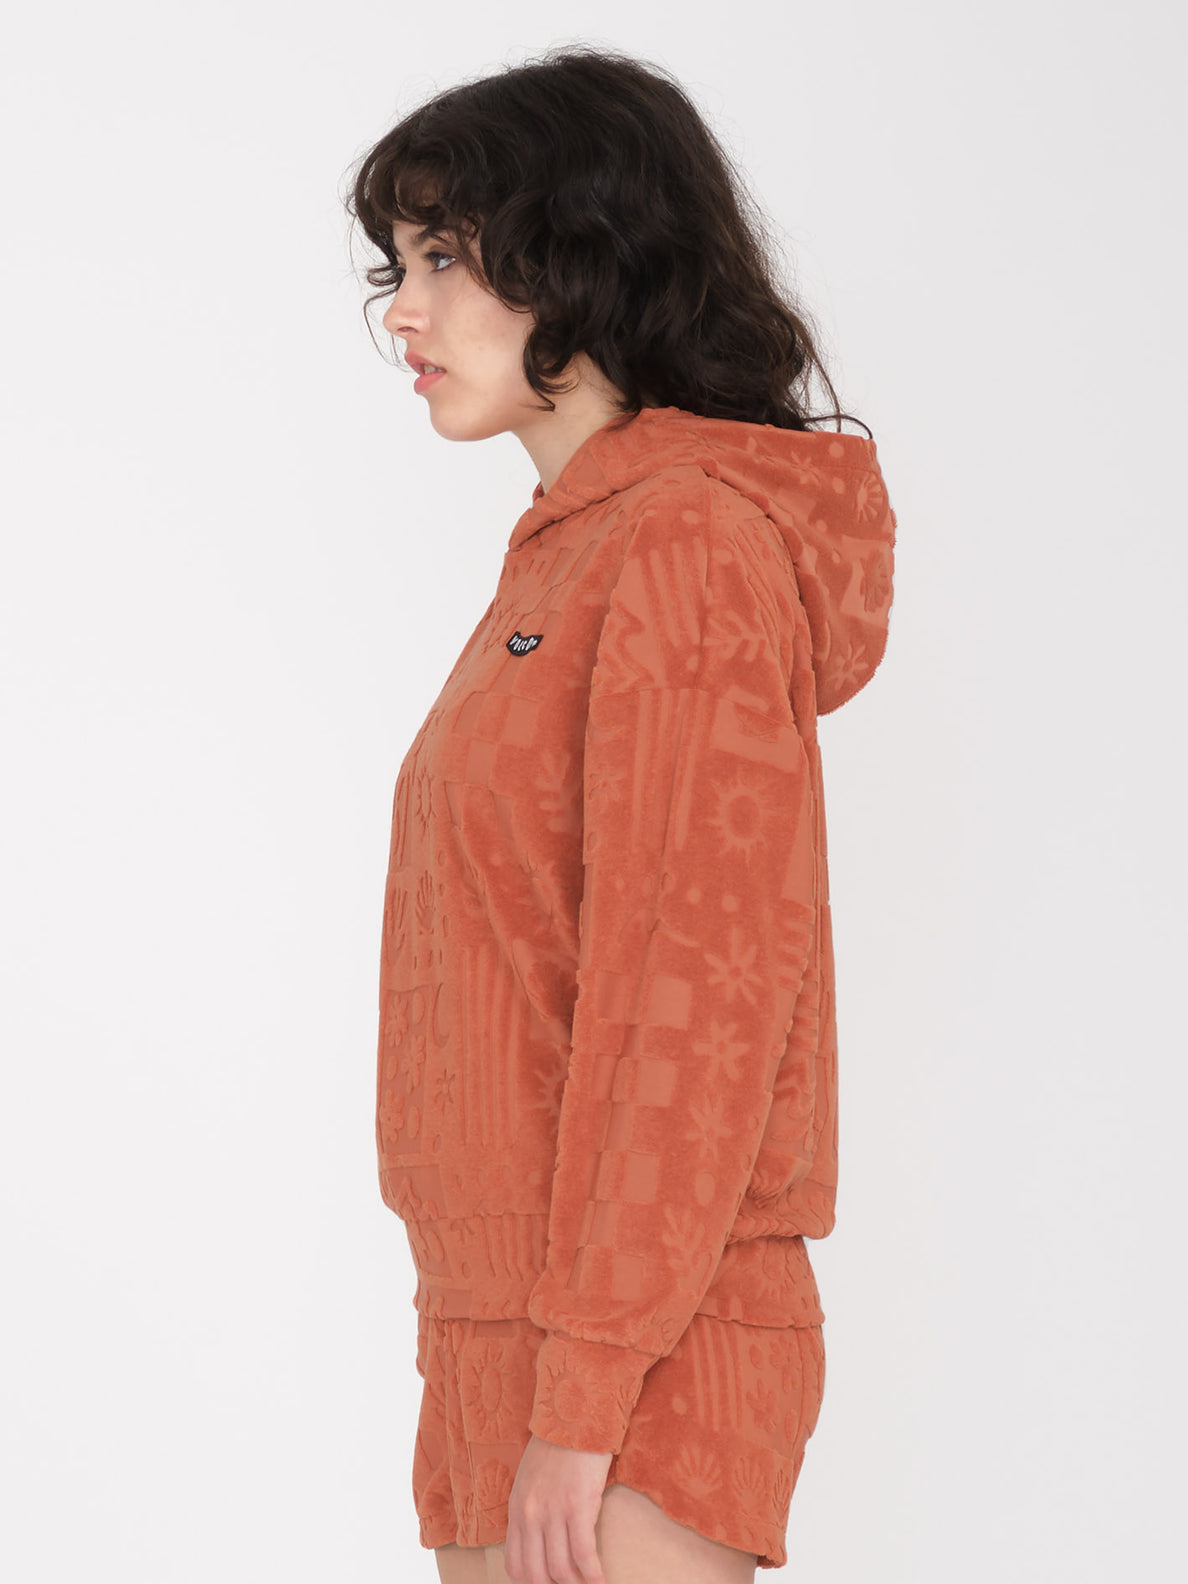 Sunny Wild Terry Cloth Pullover - Rosewood